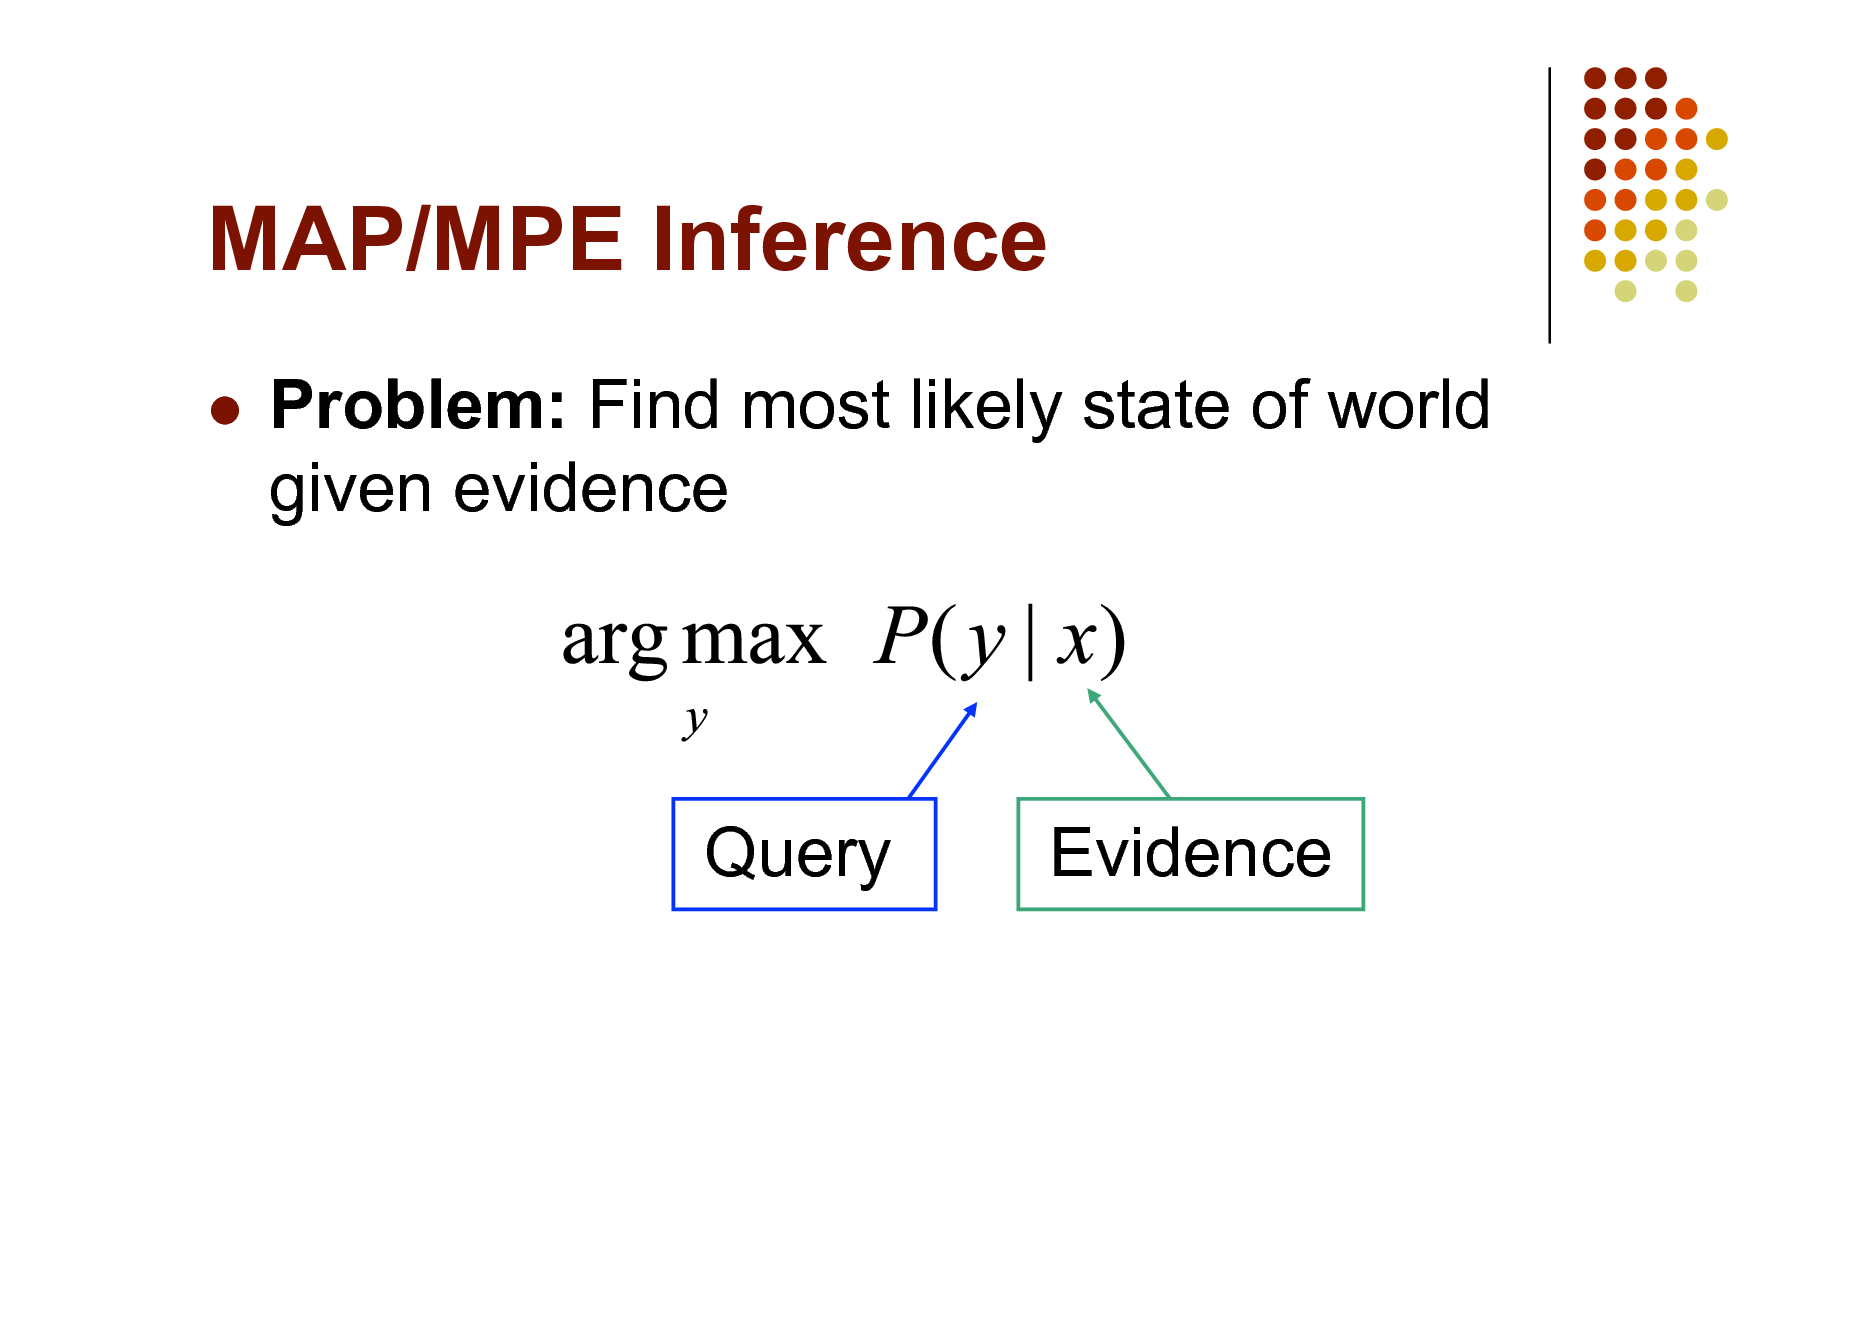 Slide: MAP/MPE Inference


Problem: Find most likely state of world given evidence

Query

Evidence

